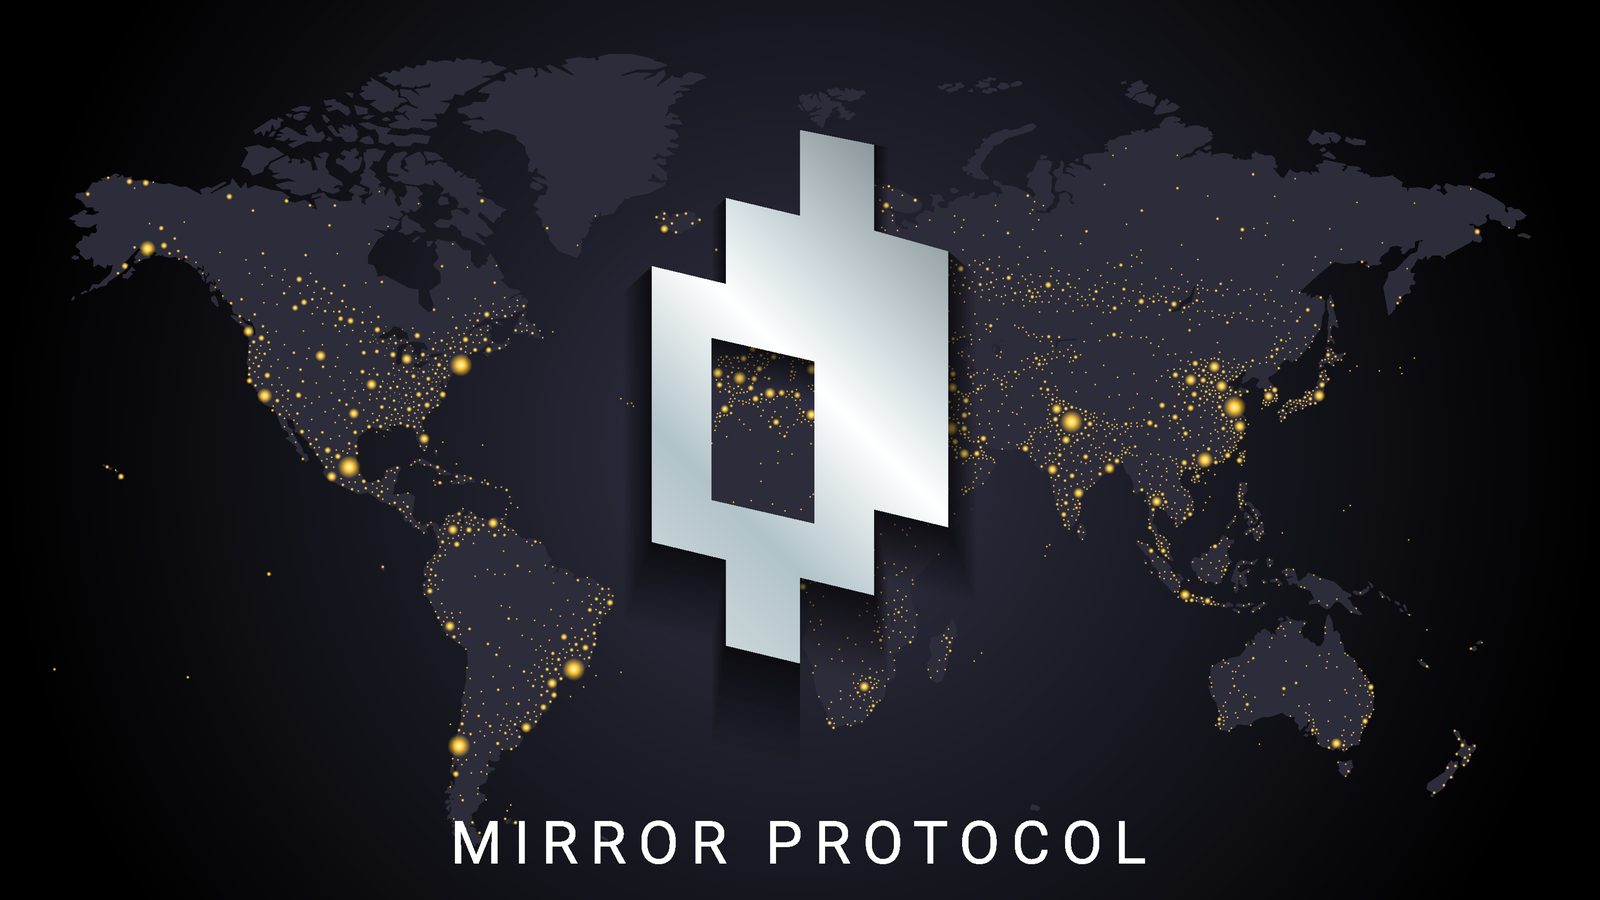 the Mirror Protocol logo in silver on top of a world map